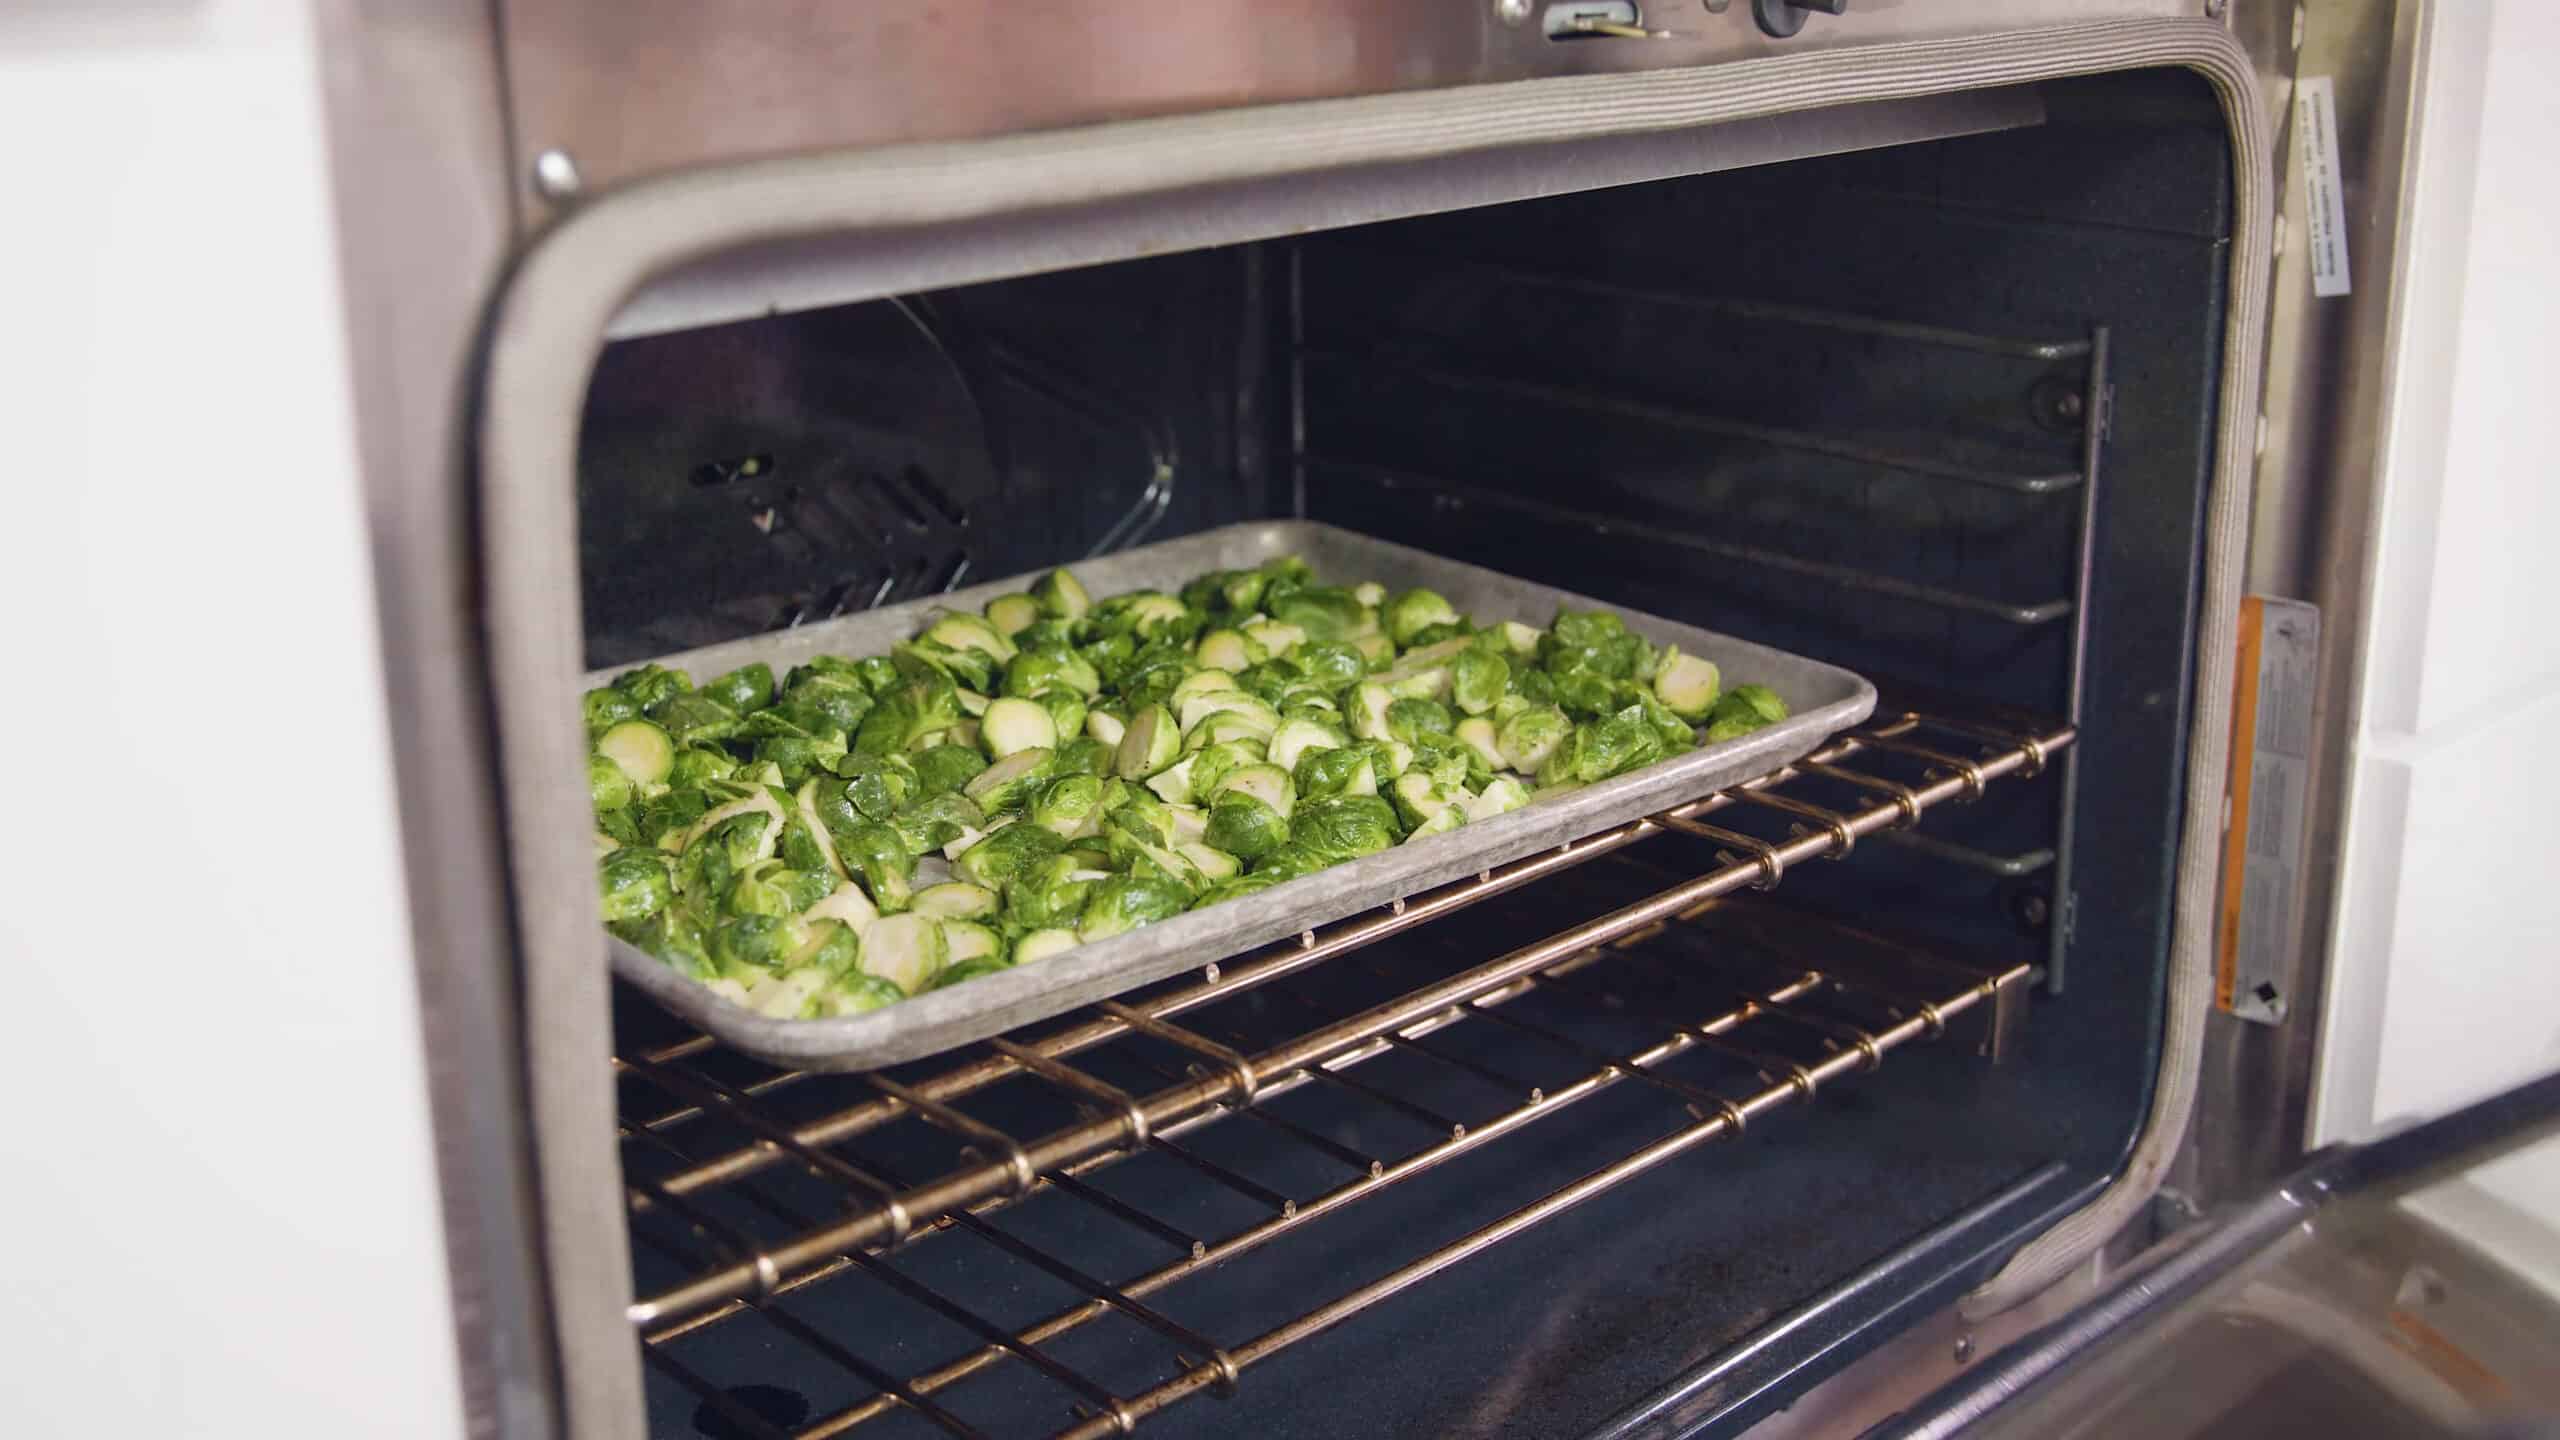 Angled view of an open oven with an aluminum baking sheet filled with seasoned sliced garlic and halved Brussel sprouts placed on a metal rack in the middle of the oven.